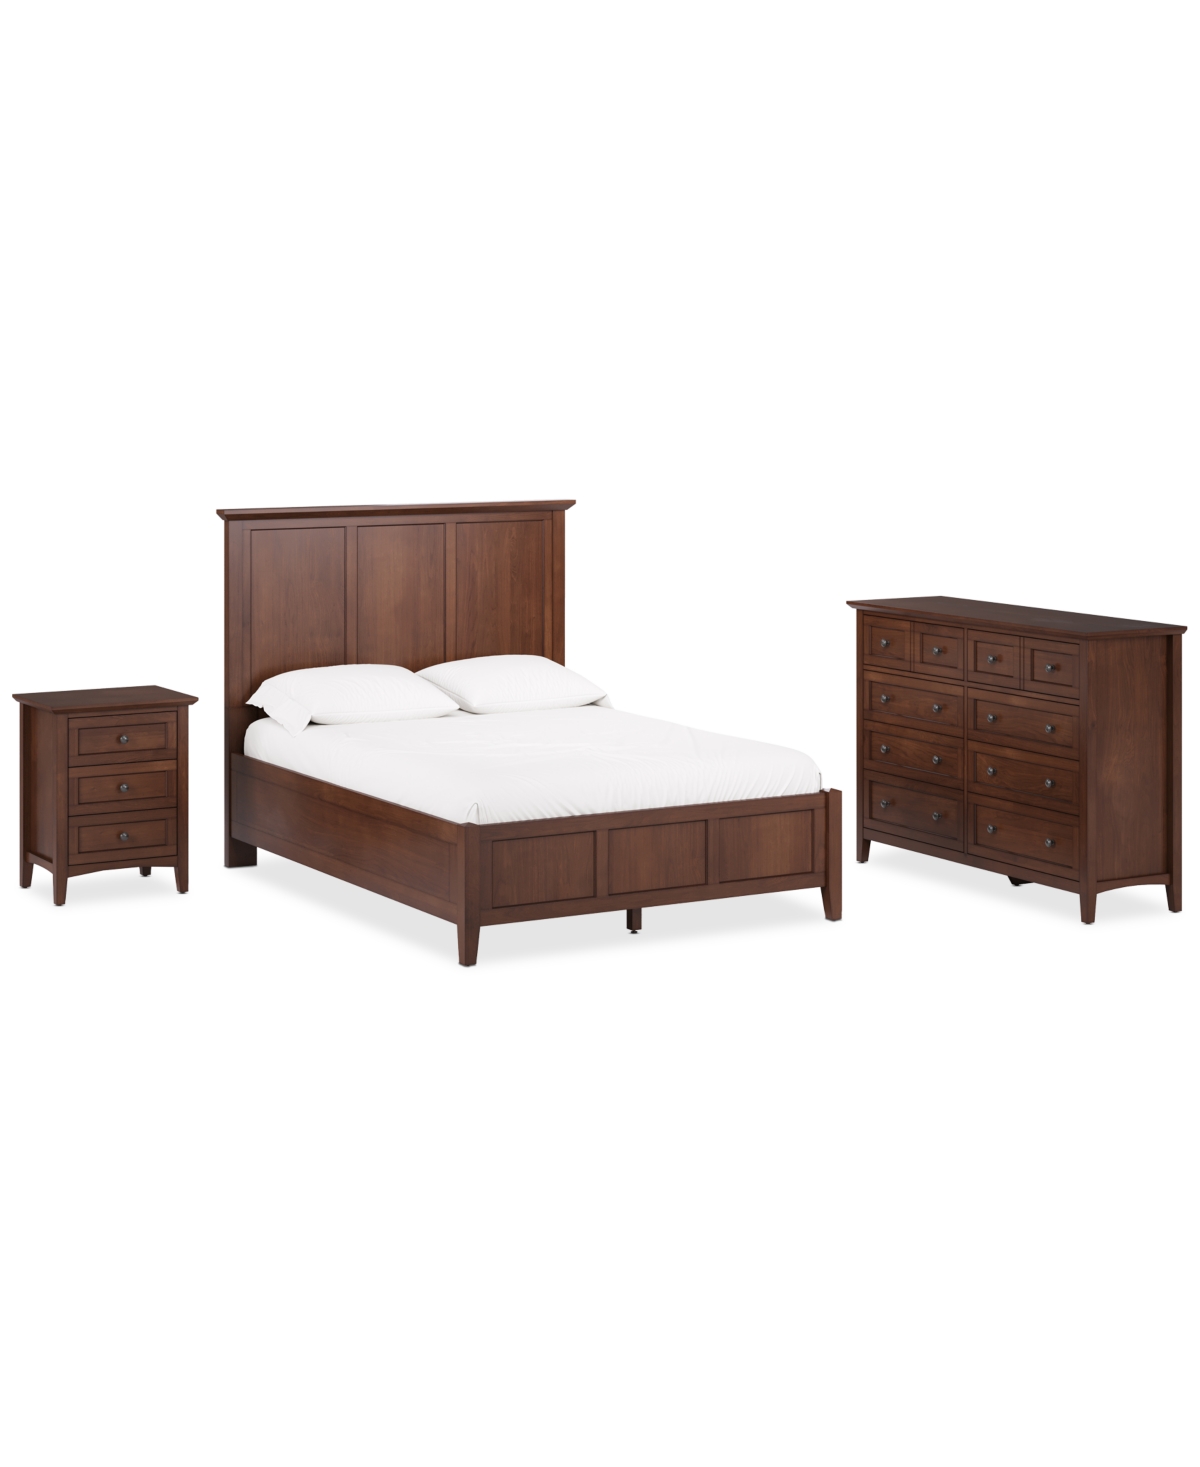 Furniture Hedworth King Bed 3pc (king Bed + Dresser + Nightstand) In Brown